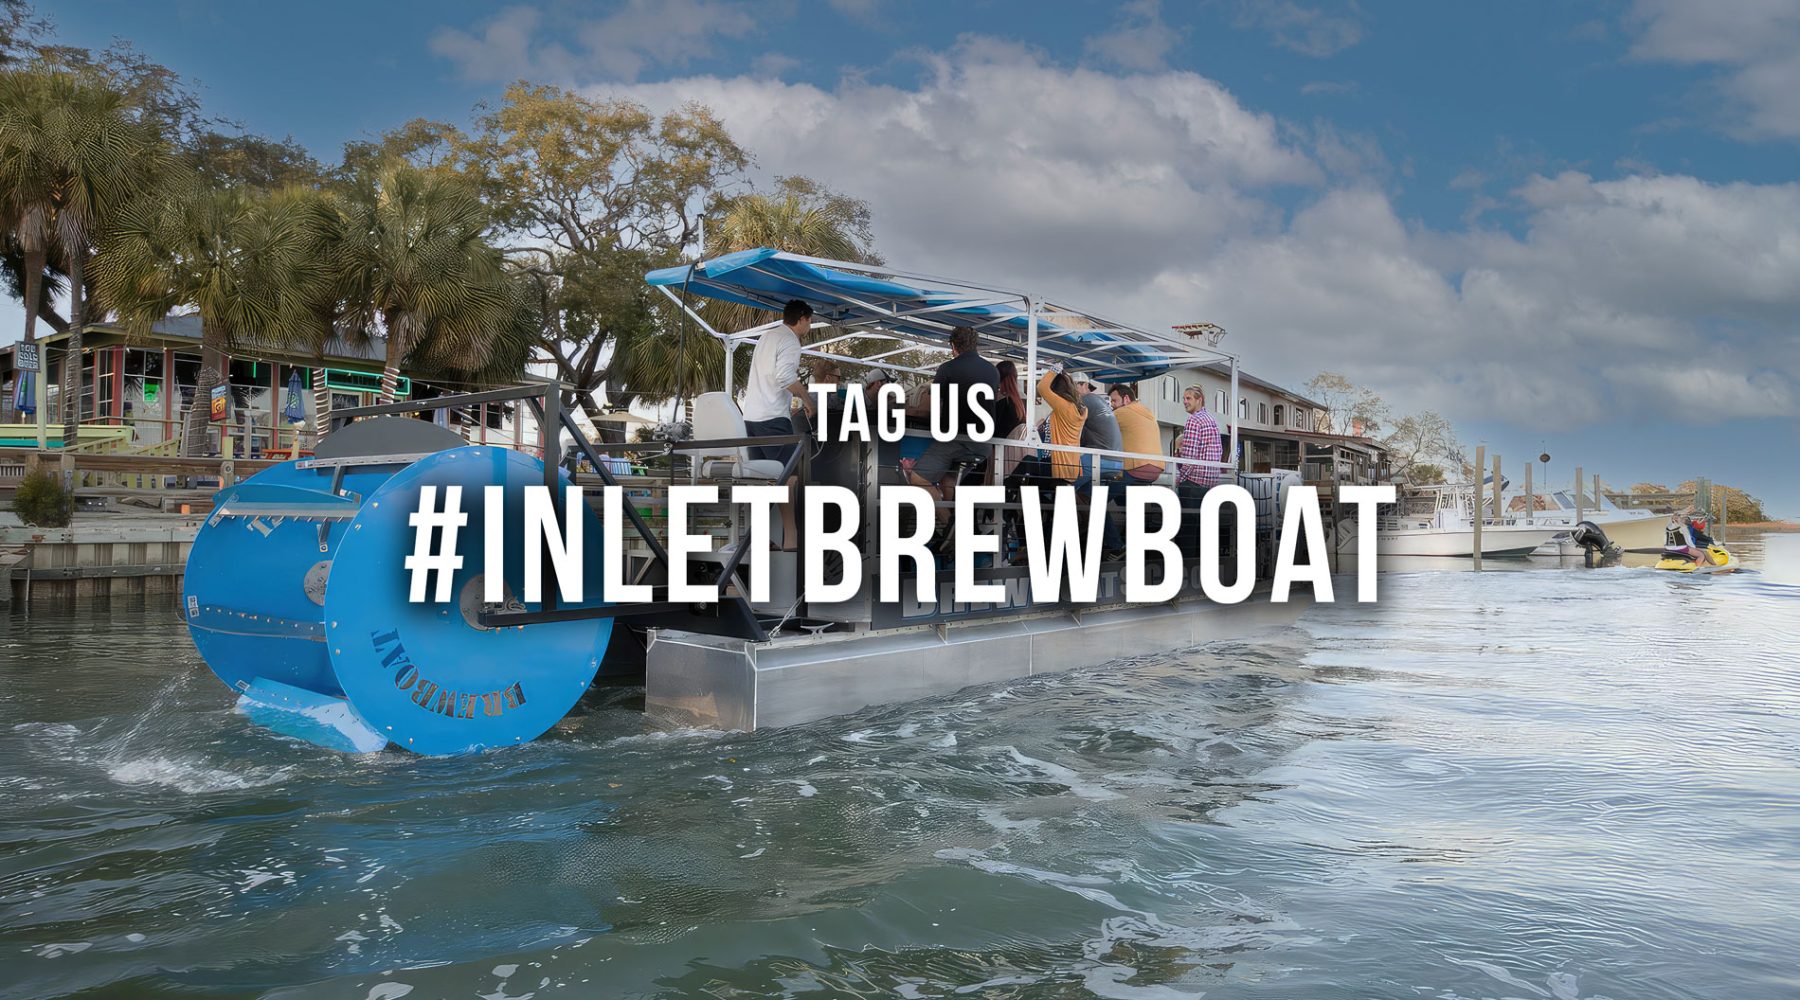 brew-boat-hashtag-banner-s